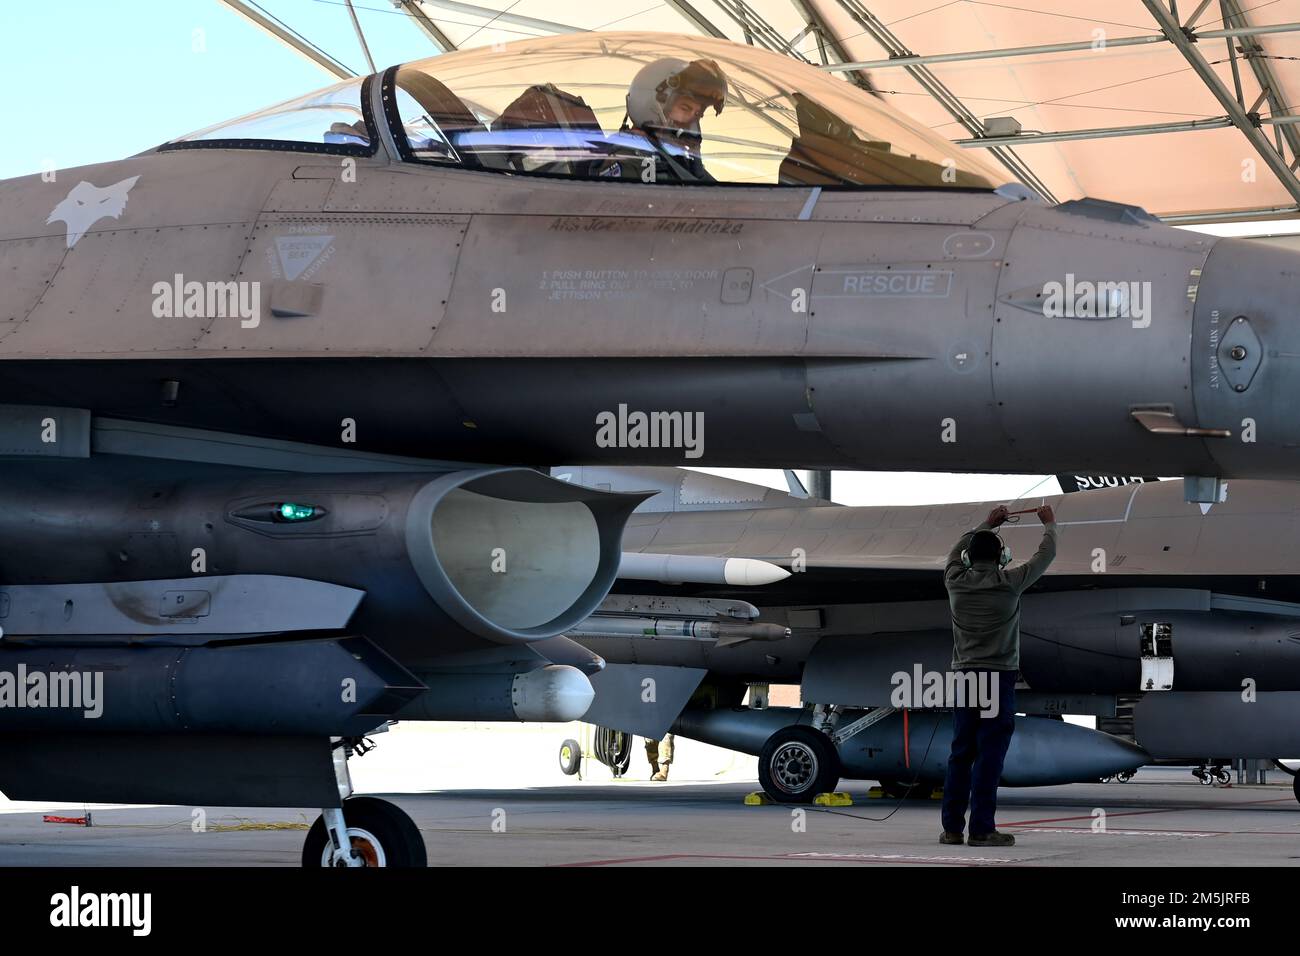 U.S. Air Force pilots and ground crew from the 169th Fighter Wing prepare for the launch of their F-16 Fighting Falcon jets from McEntire Joint National Guard Base, South Carolina, March 20, 2022. Stock Photo